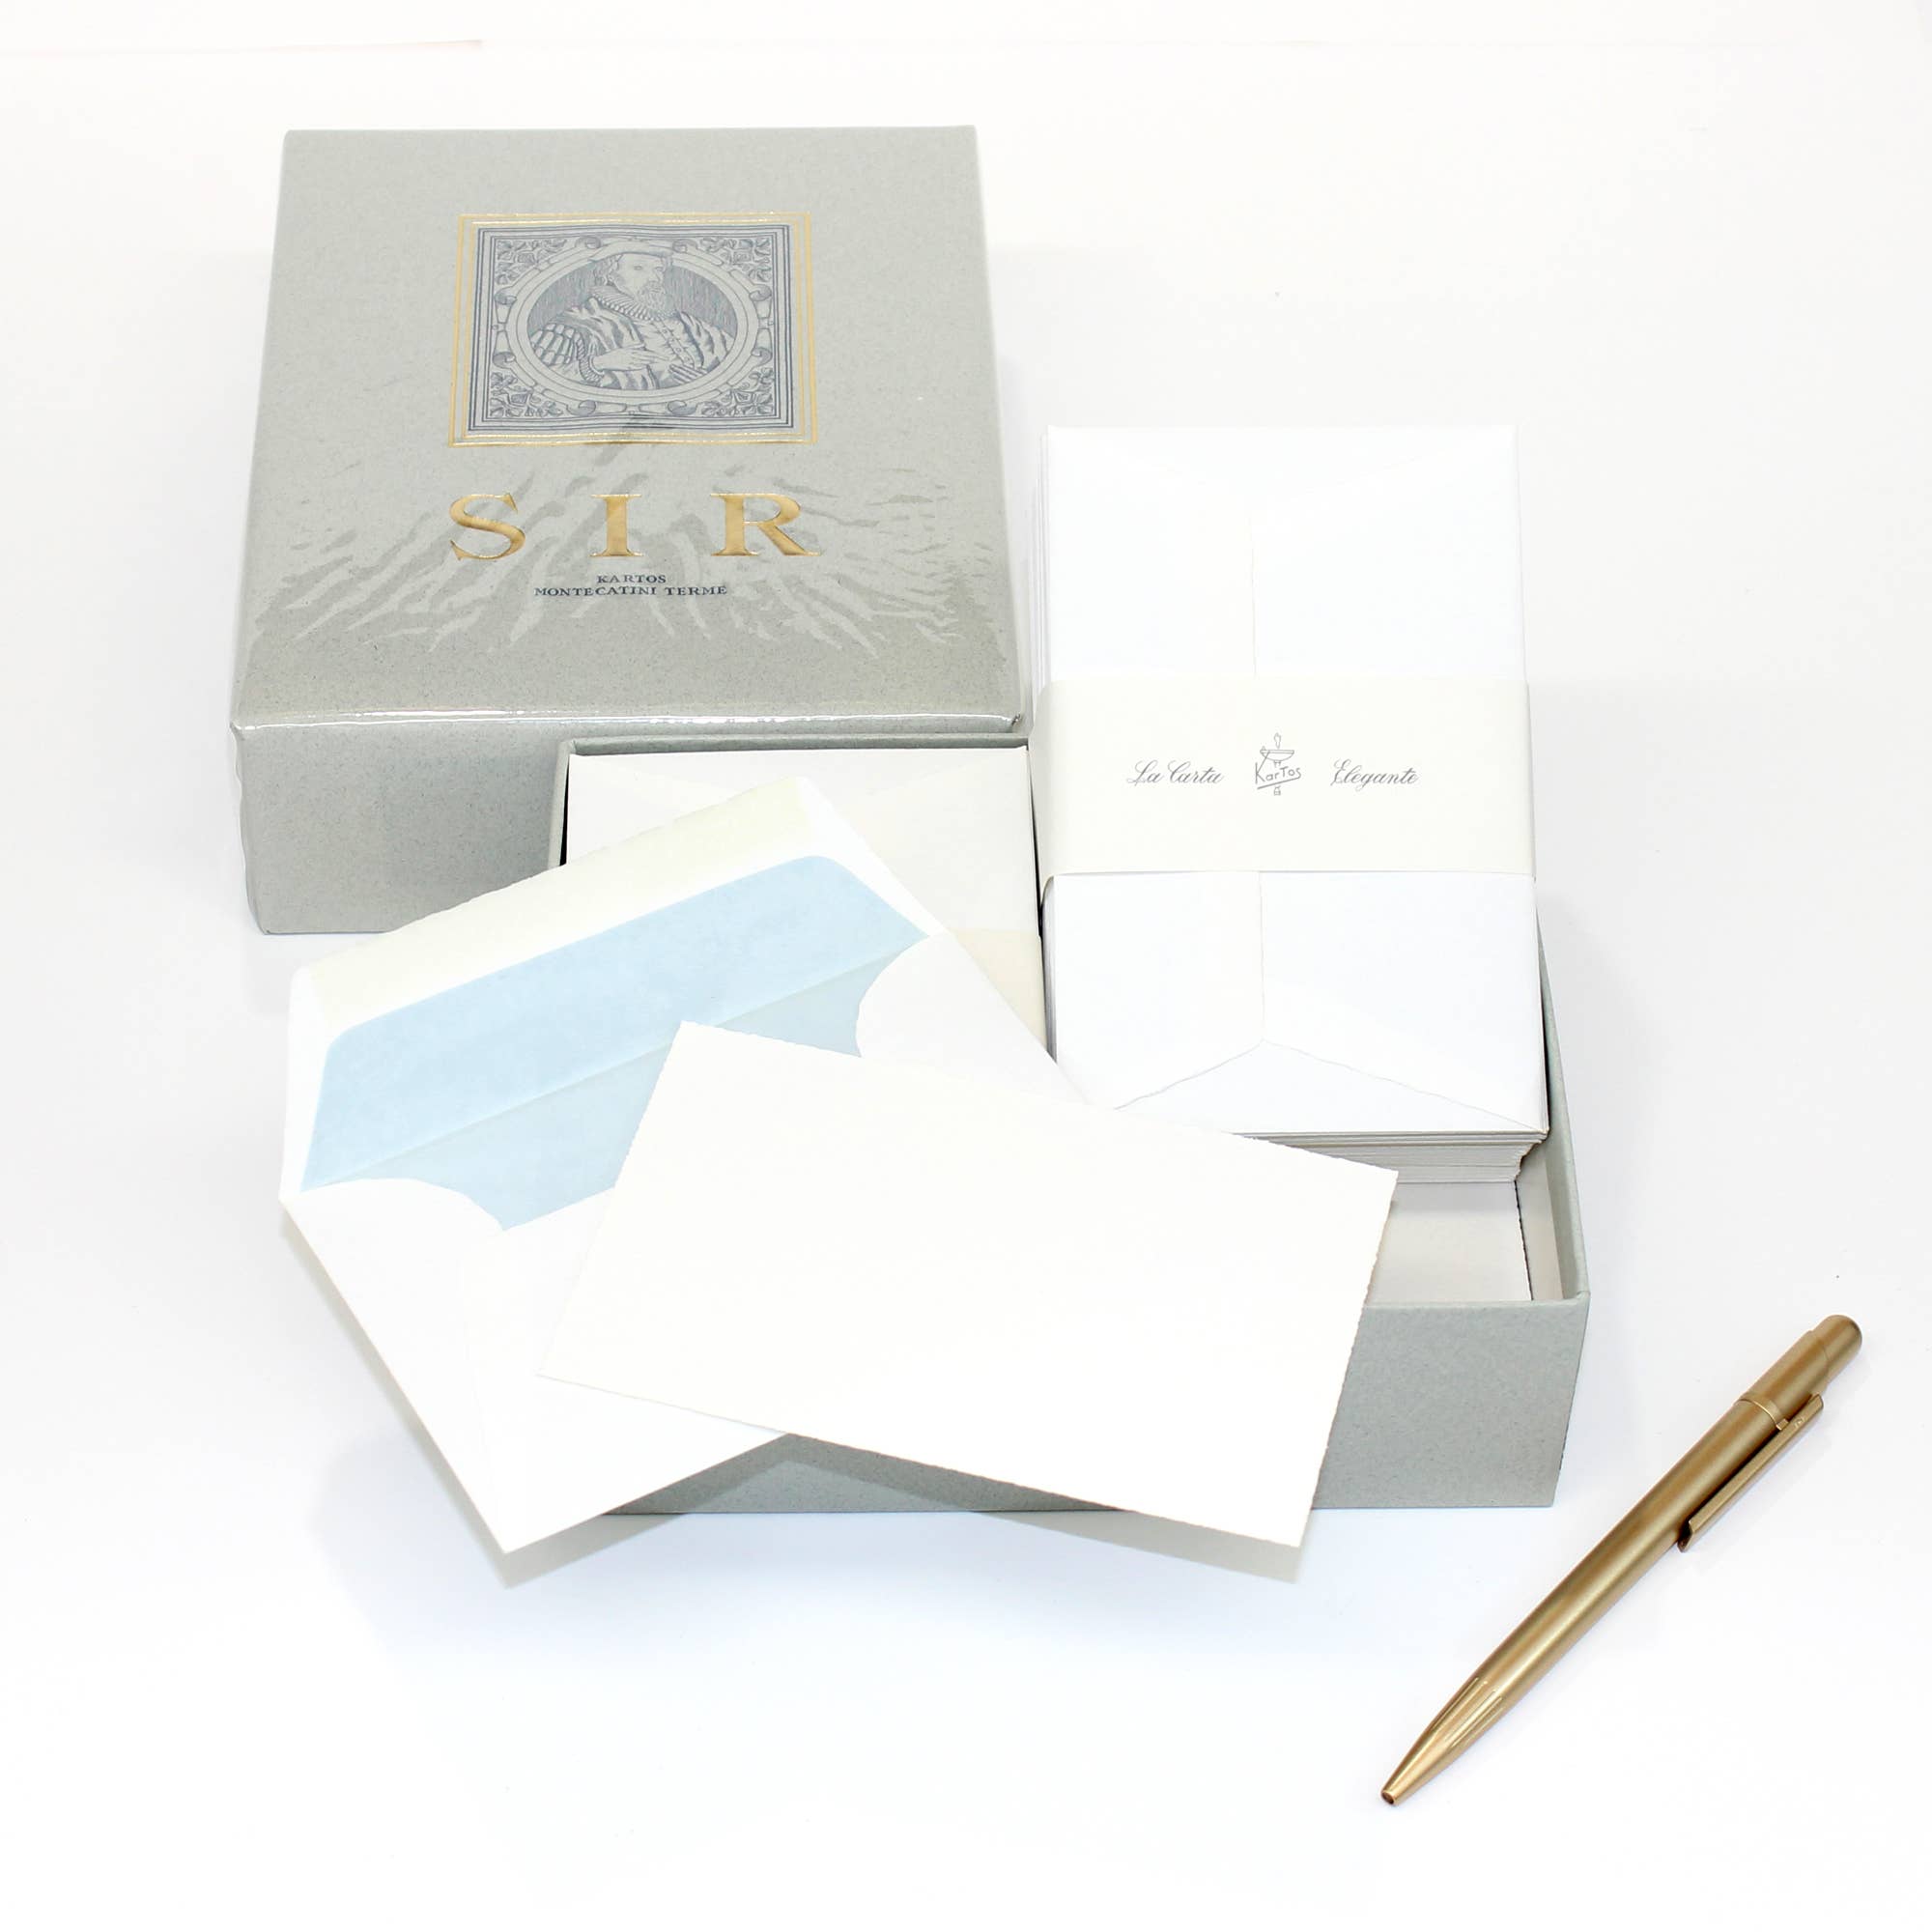 Kartos "SIR" Collection Deckled-Edge Cards, Stationery